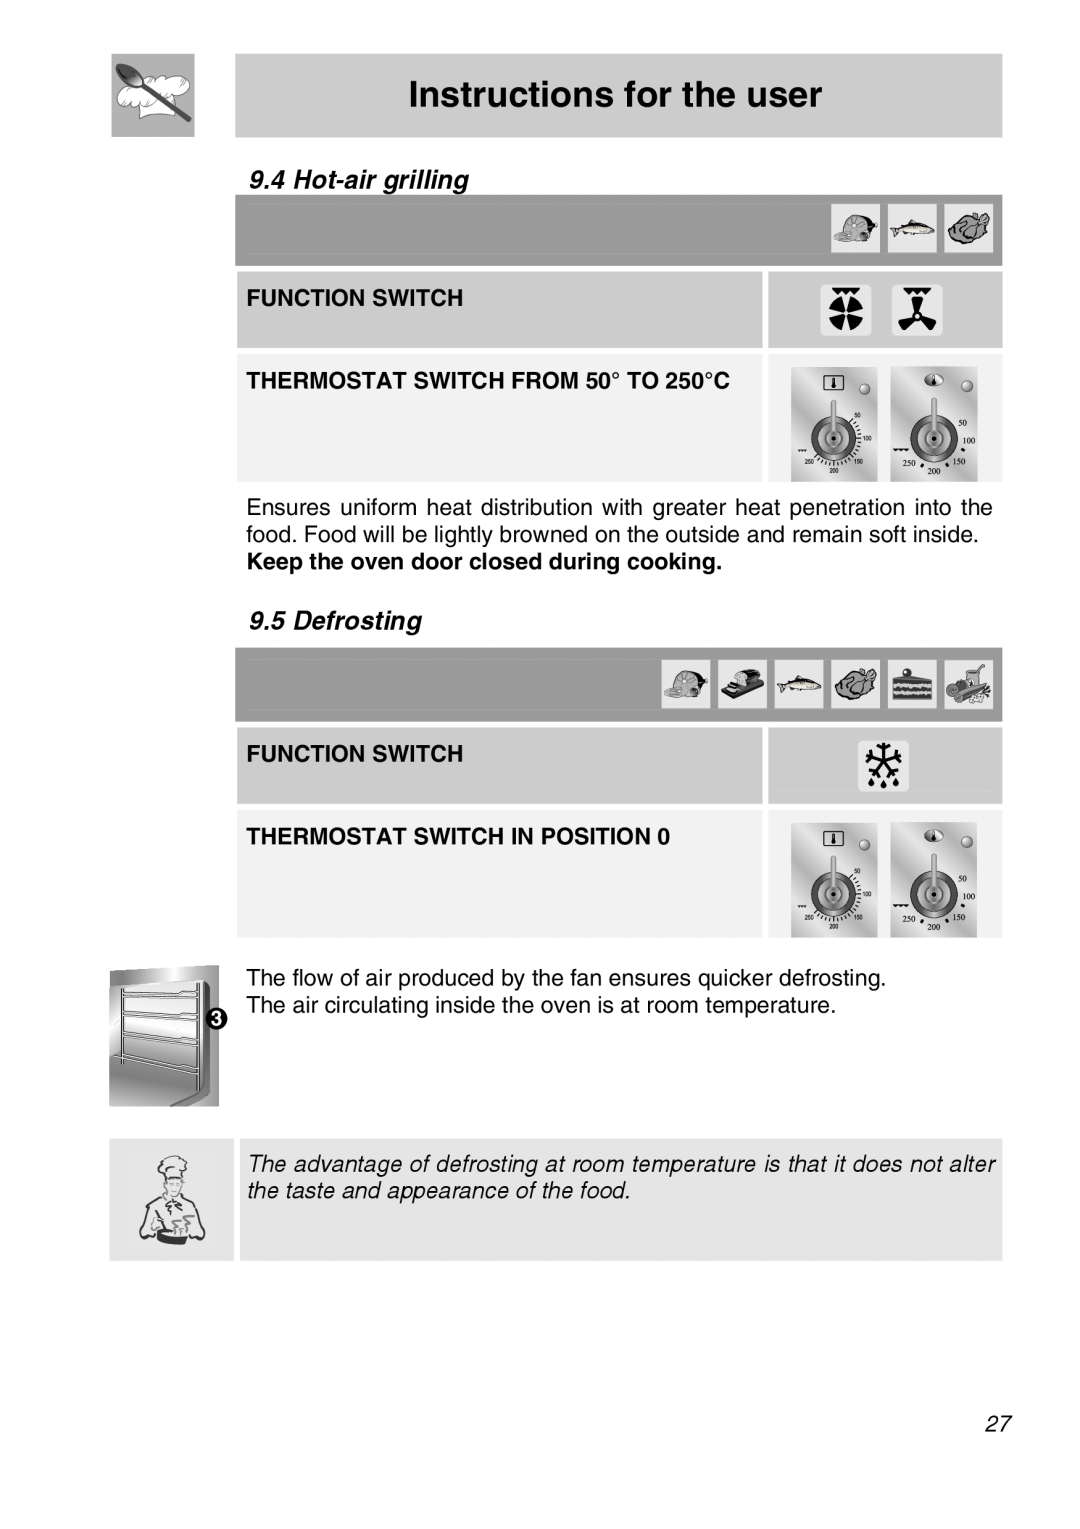 Smeg A11A-6 Instructions for the user, Hot-air grilling, Defrosting, FUNCTION SWITCH THERMOSTAT SWITCH FROM 50 TO 250C 